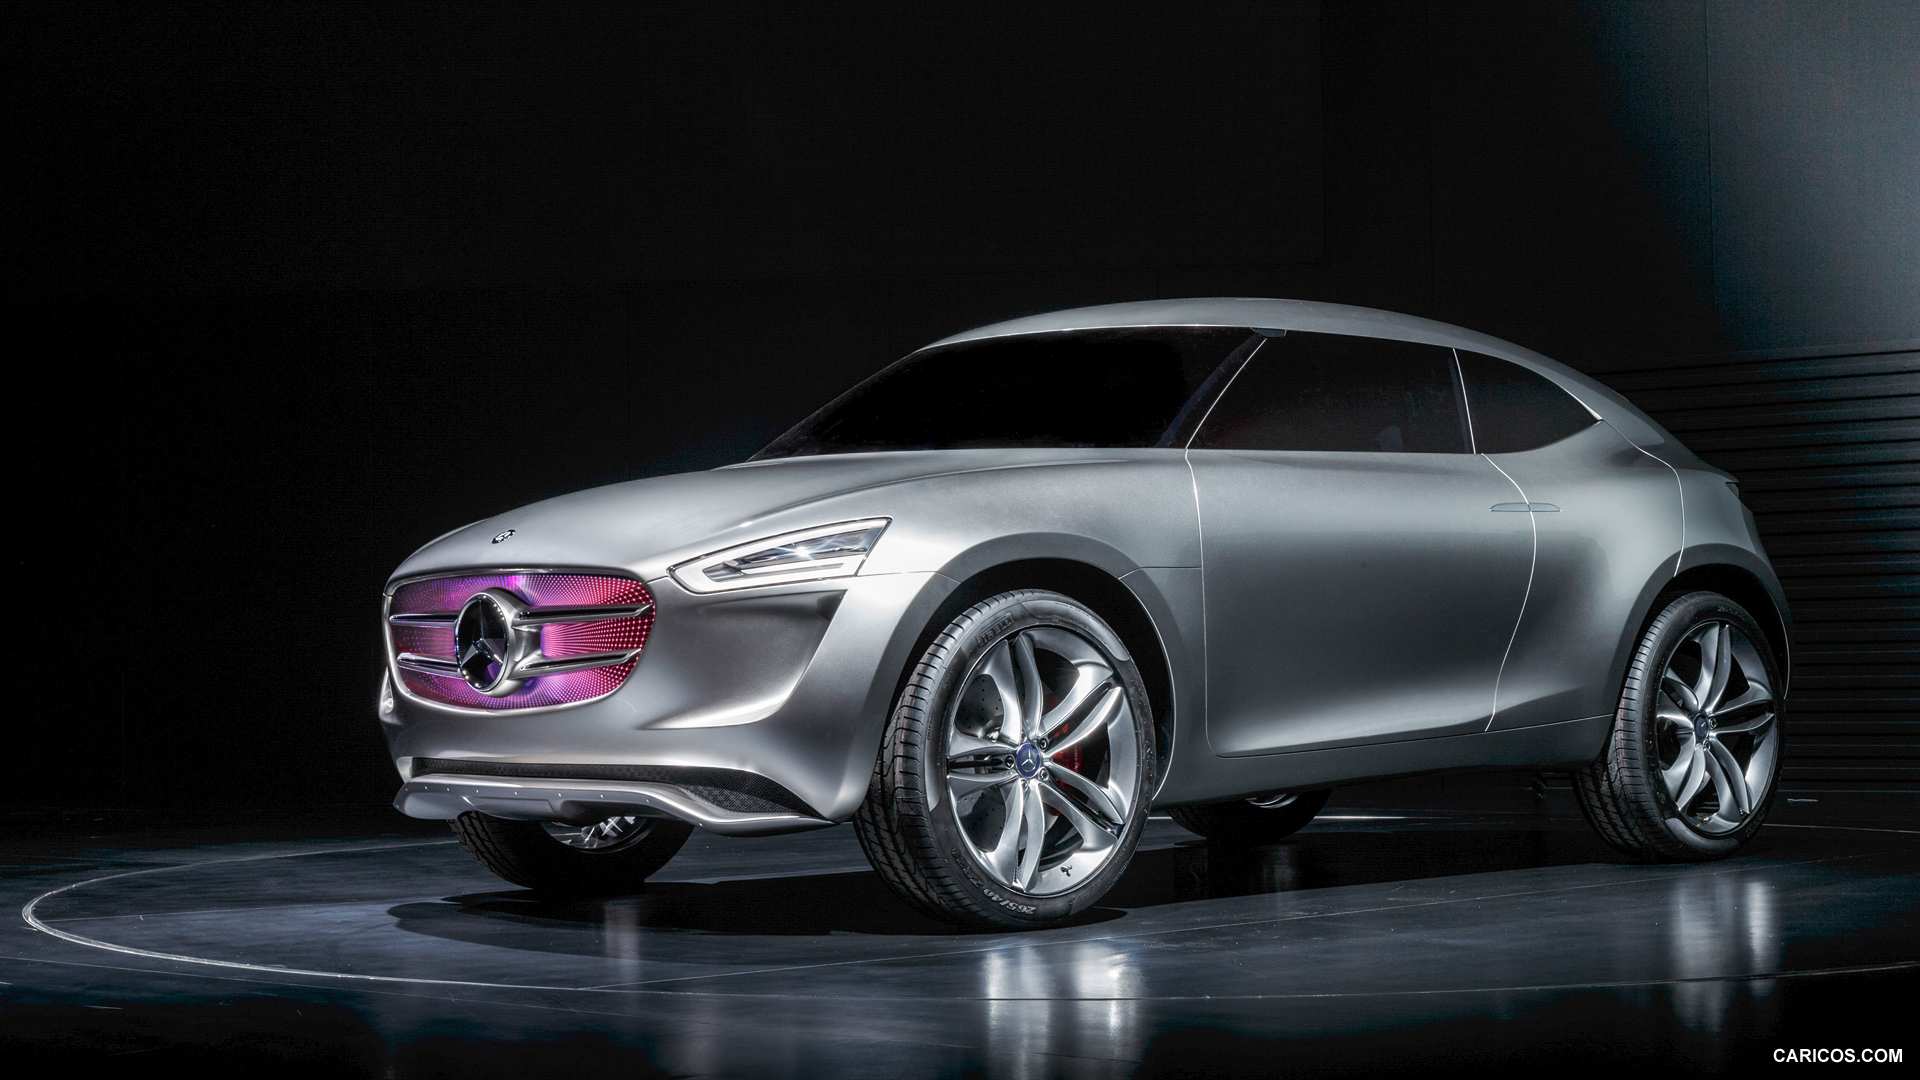 2014 Mercedes-Benz Vision G-Code SUC Concept  - Front, #1 of 19